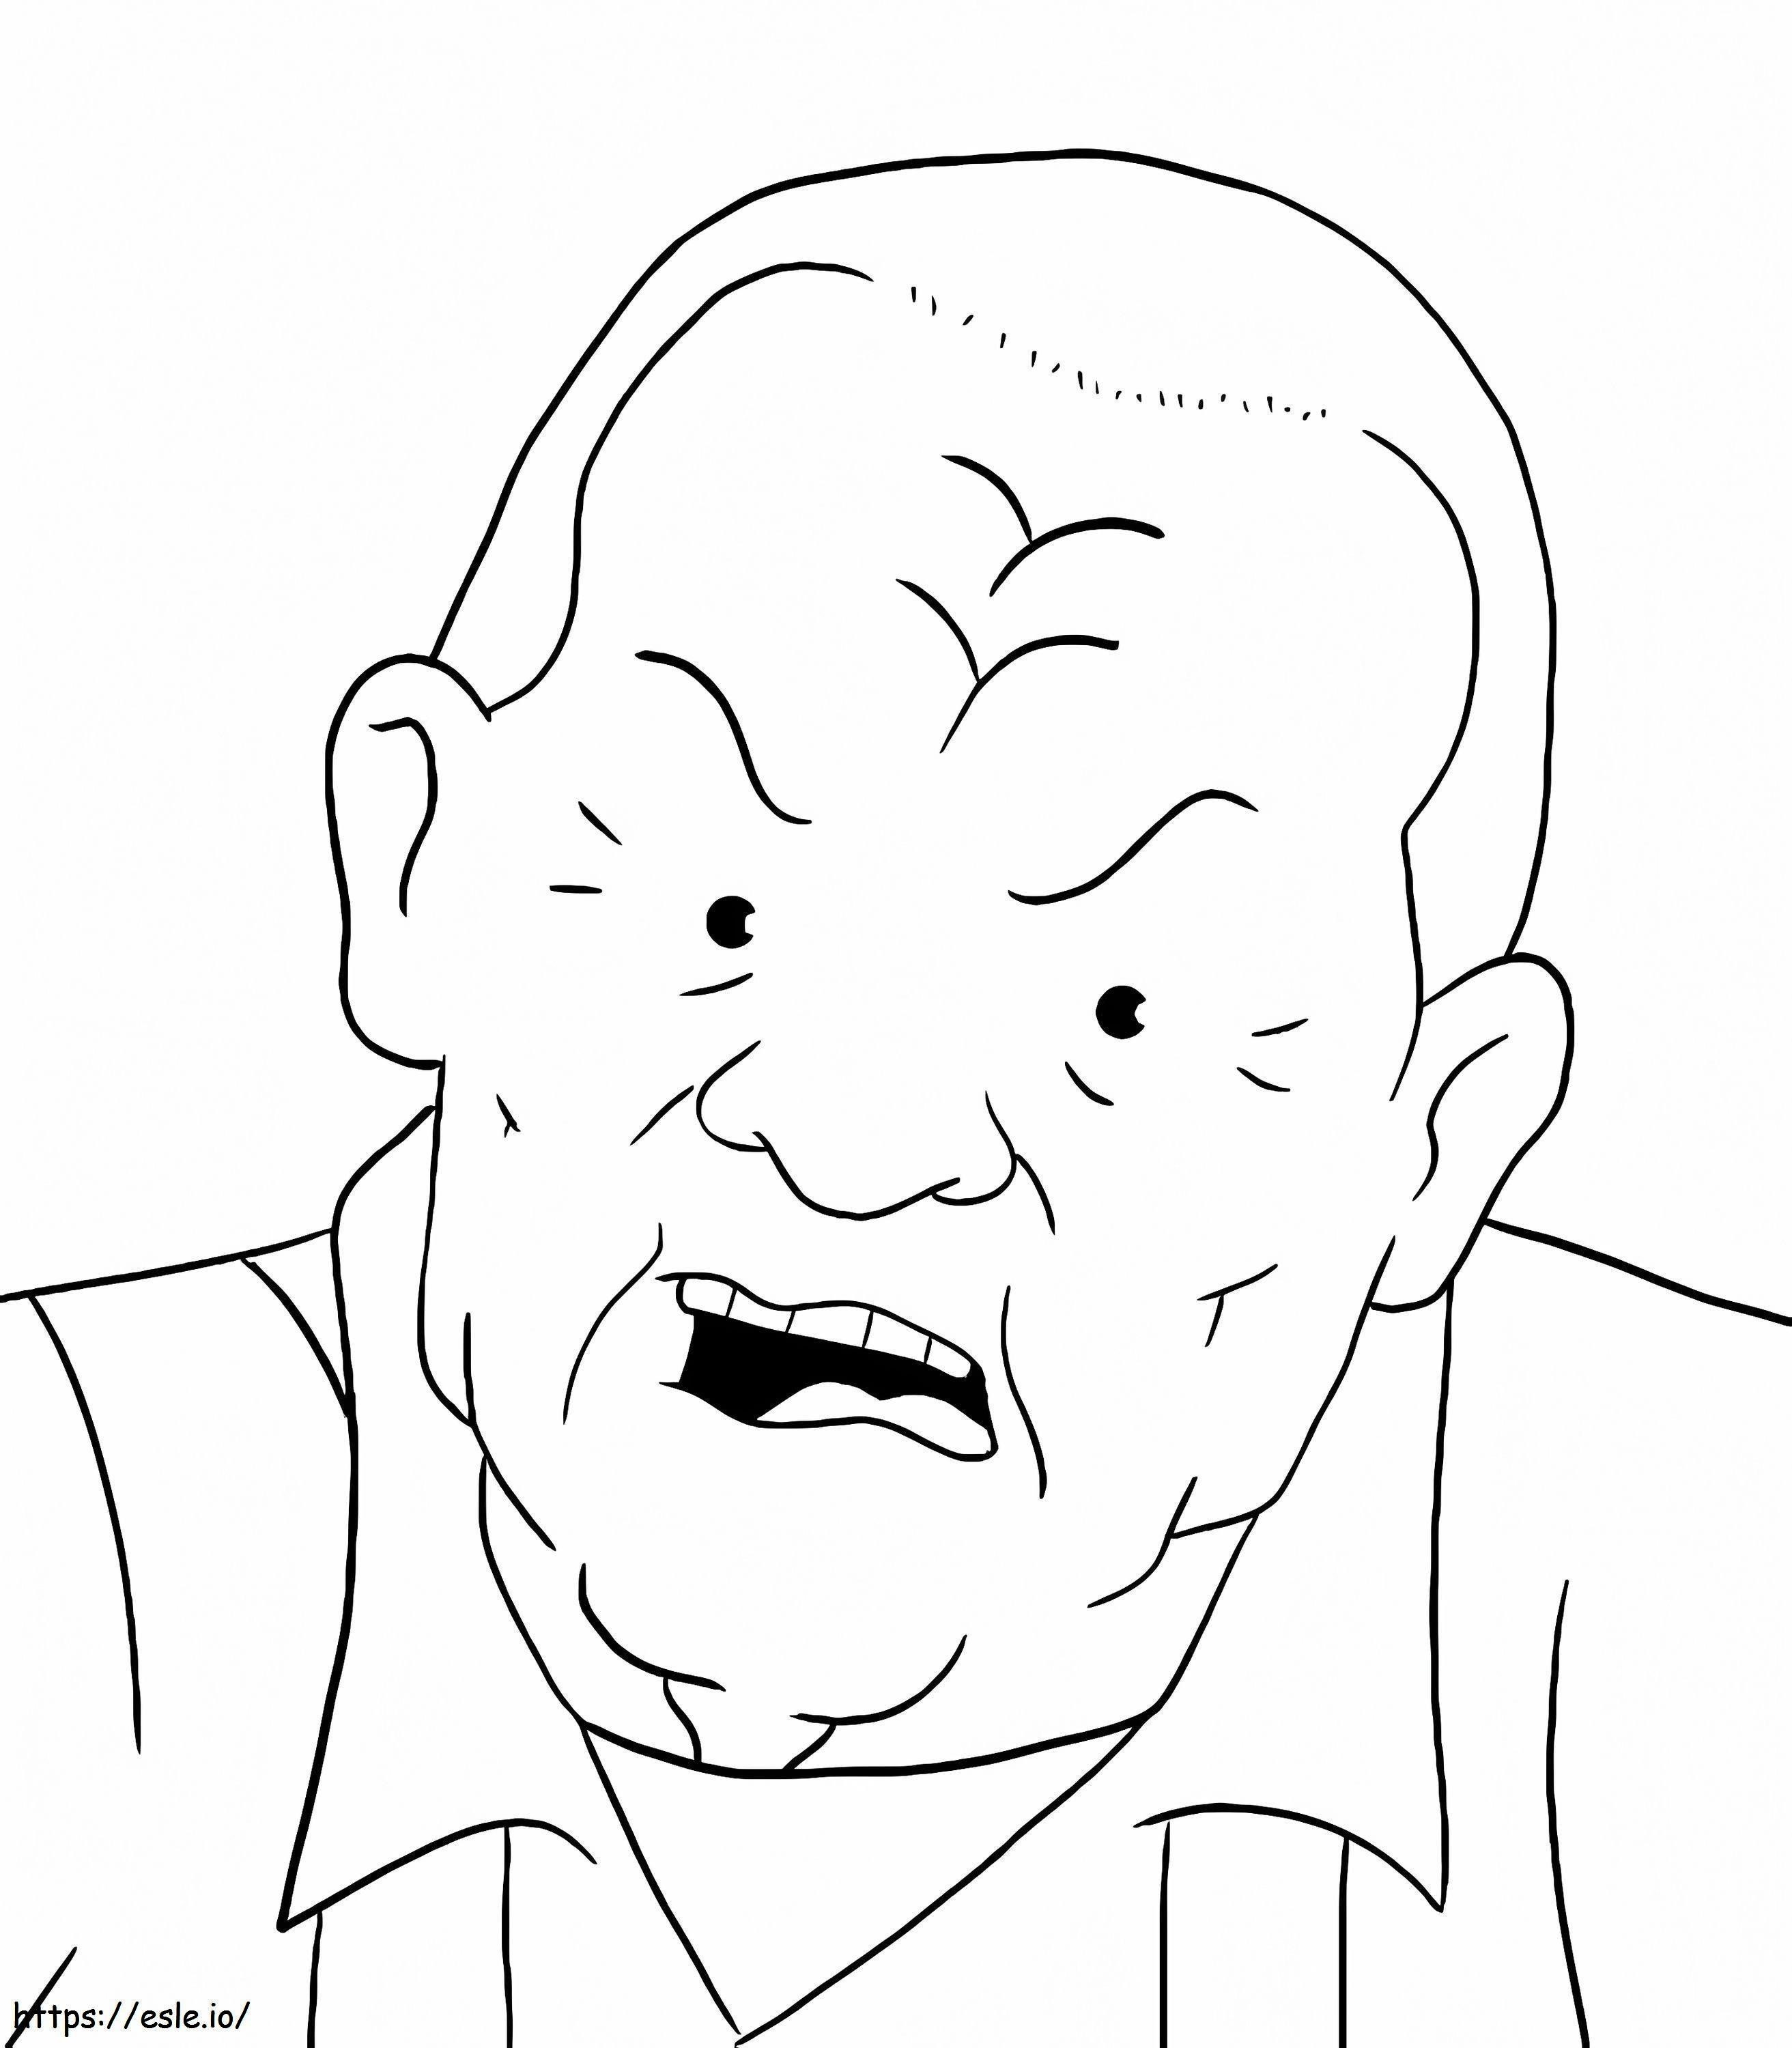 Cotton Hill In King Of The Hill coloring page